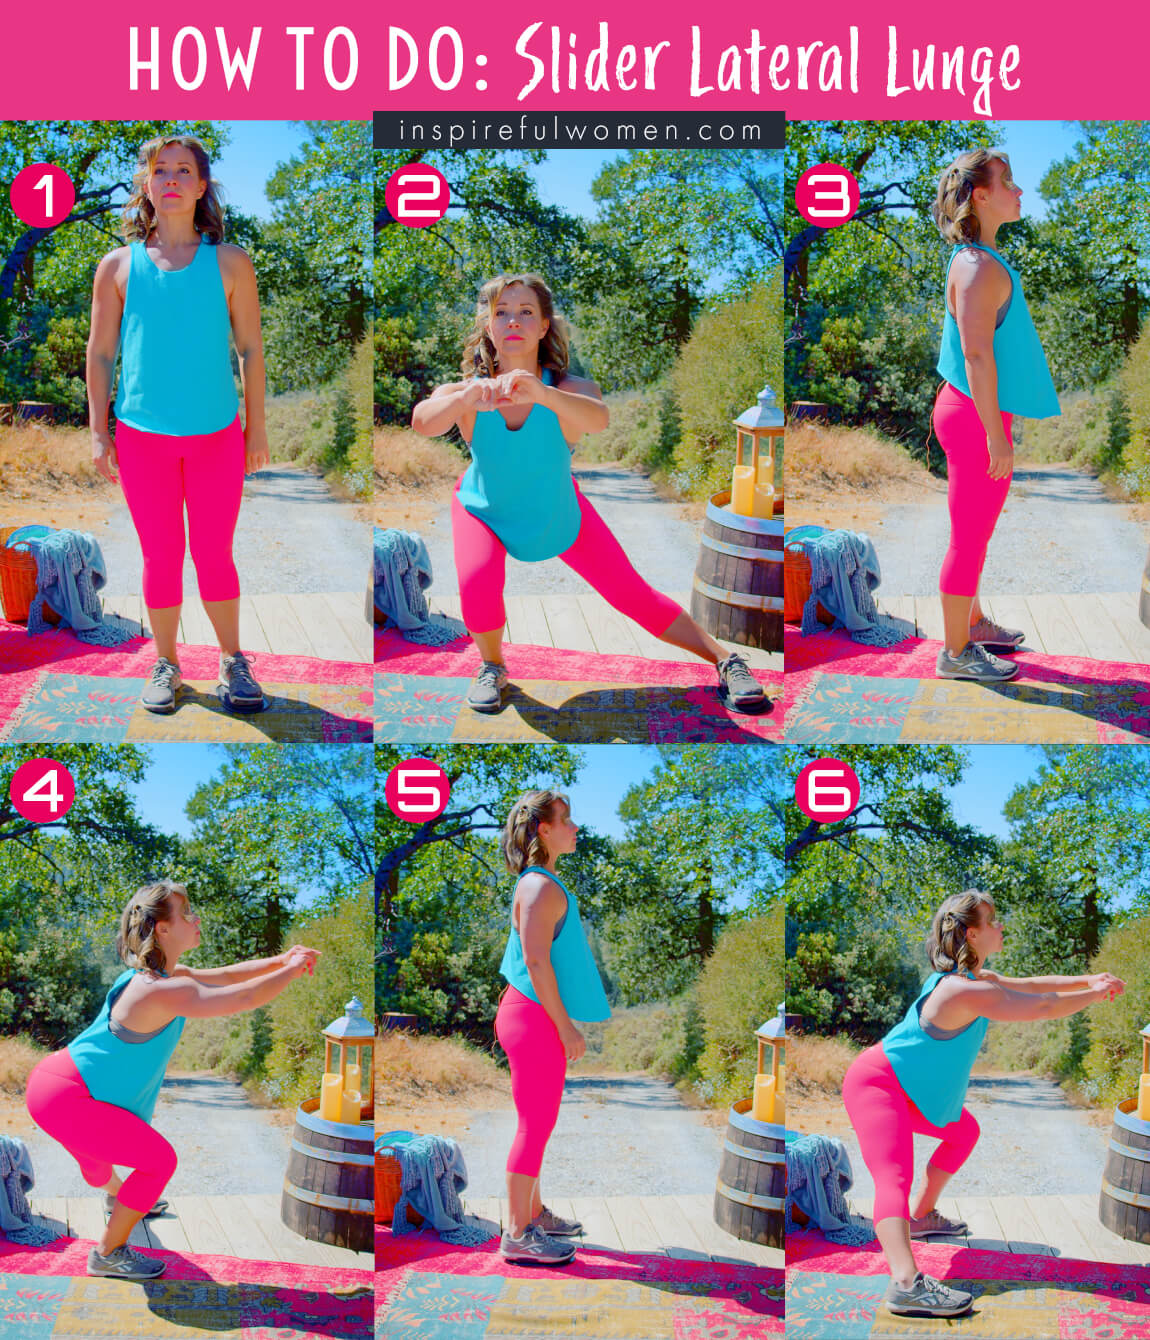 how-to-slider-lateral-lunge-squat-alternative-inner-thigh-quad-adductor-glute-exercise-proper-form